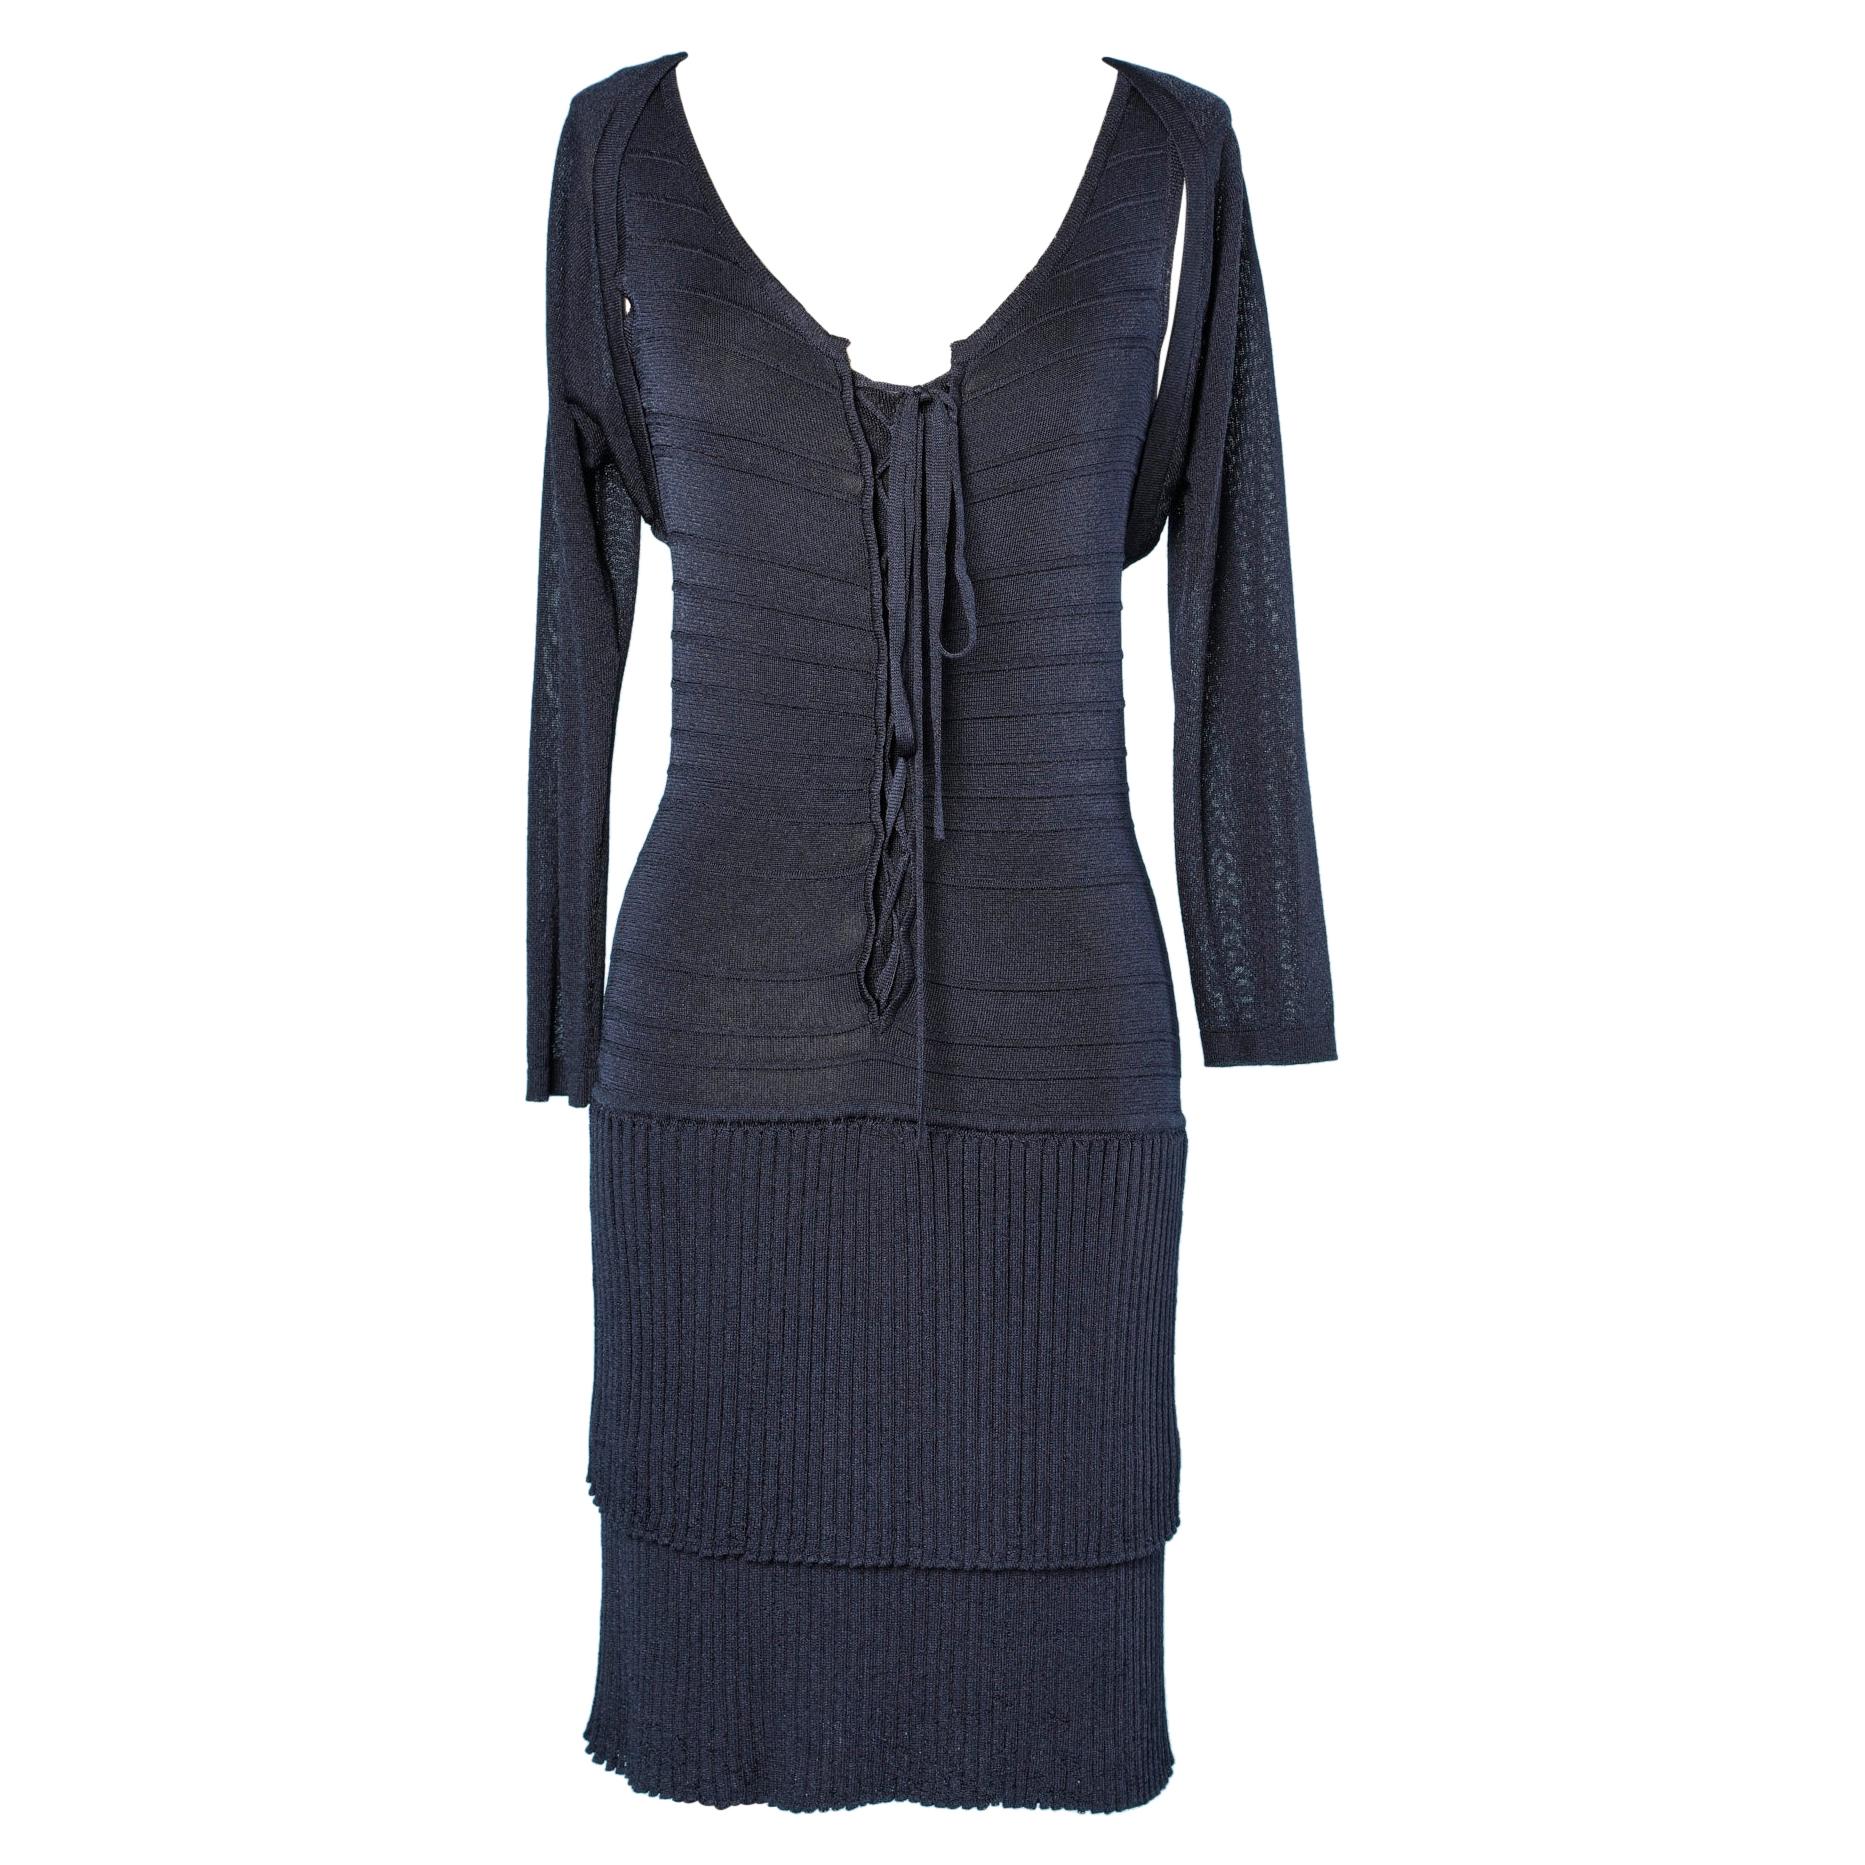 Dress and Boléro in navy blue viscose knit Luisa Spagnoli  For Sale